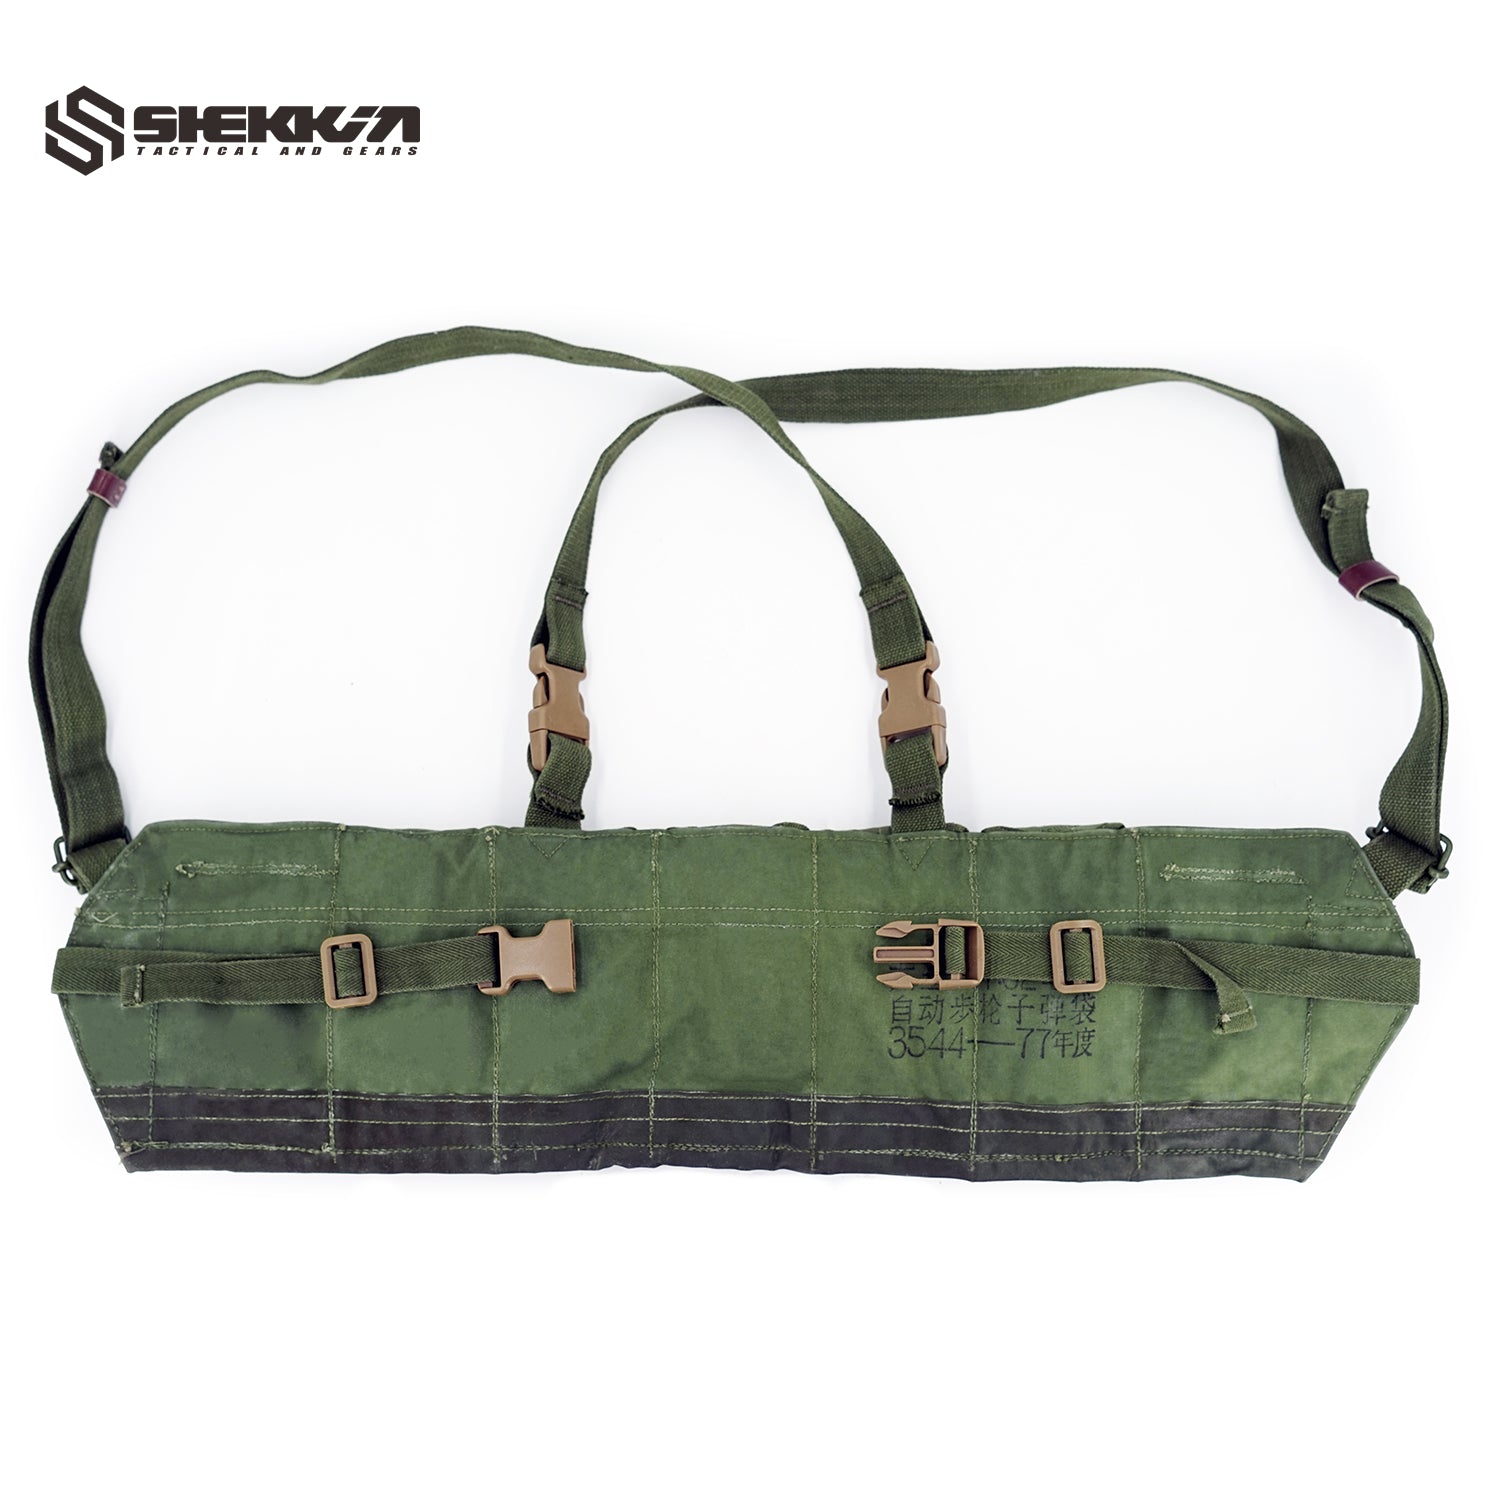 Type 63 combat Chest rig with adapt buckles